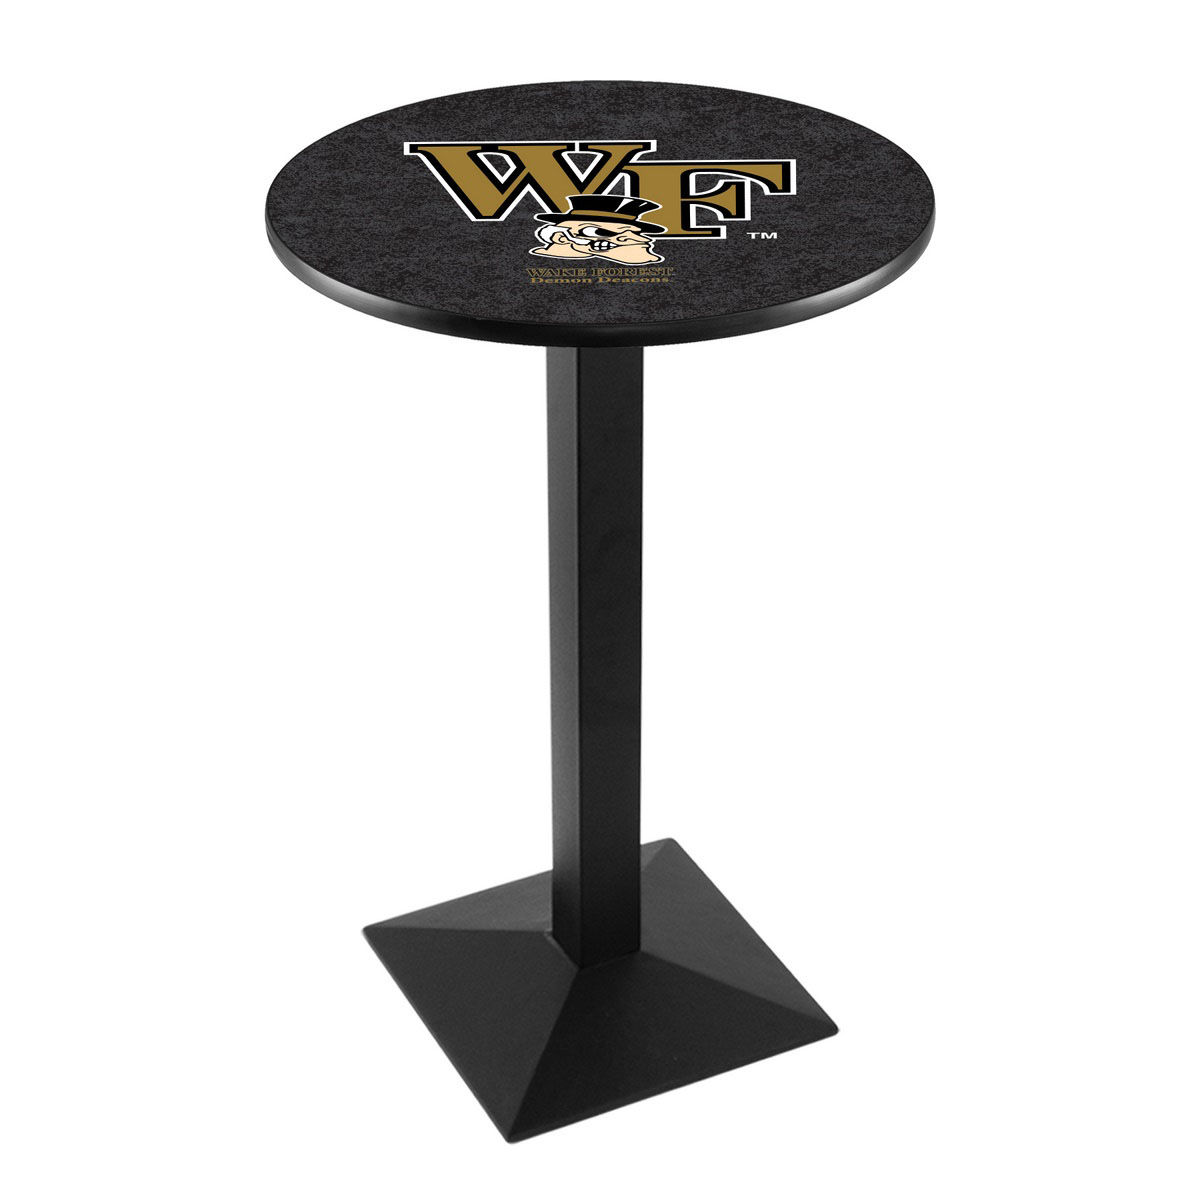 Wake Forest University Logo Pub Bar Table With Square Stand